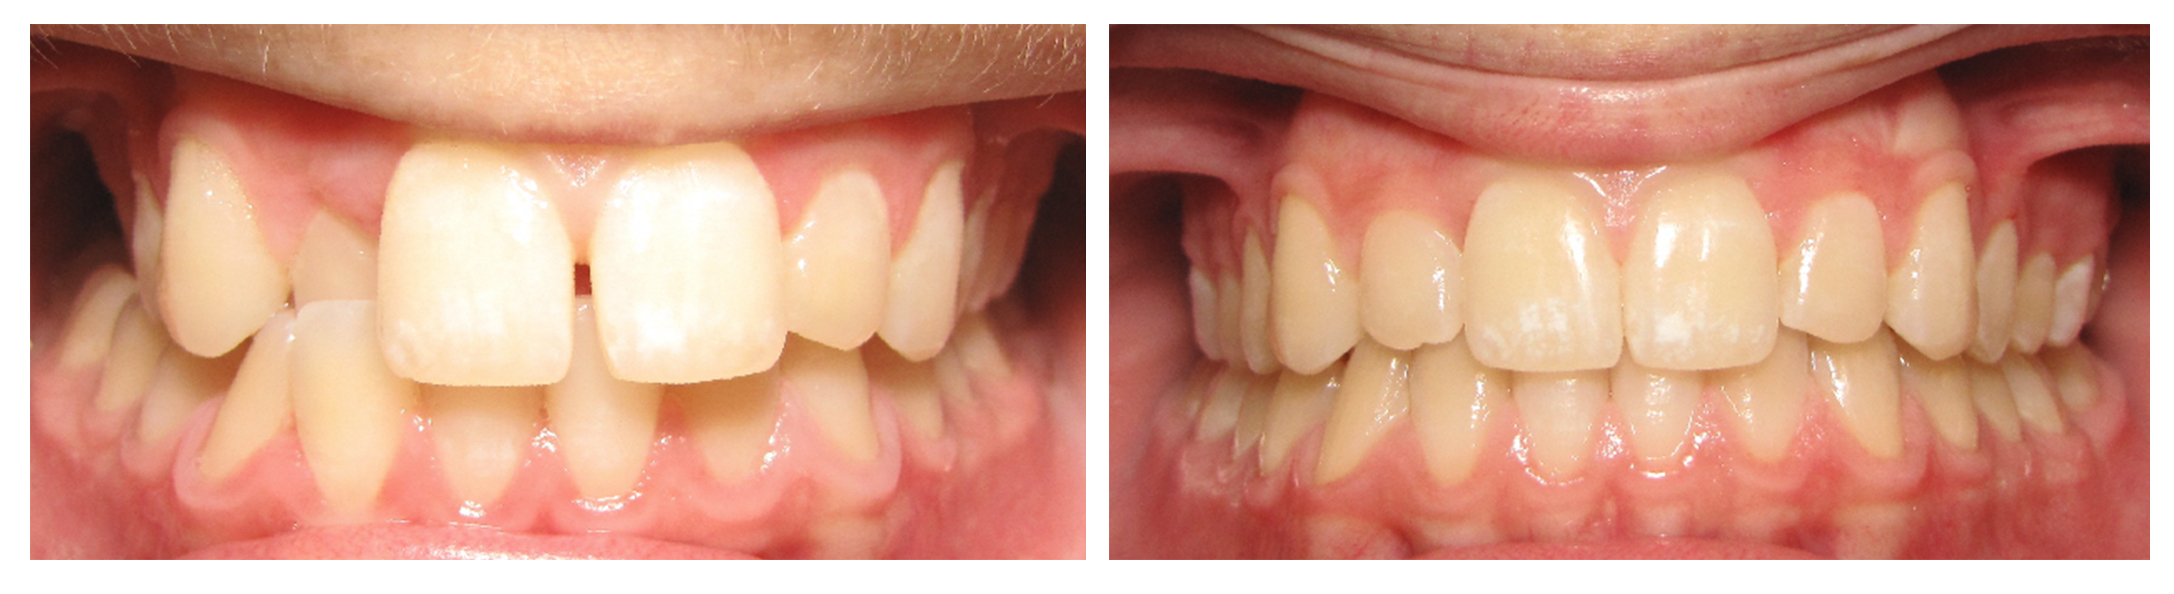 Teen boy anterior before & after Invisalign